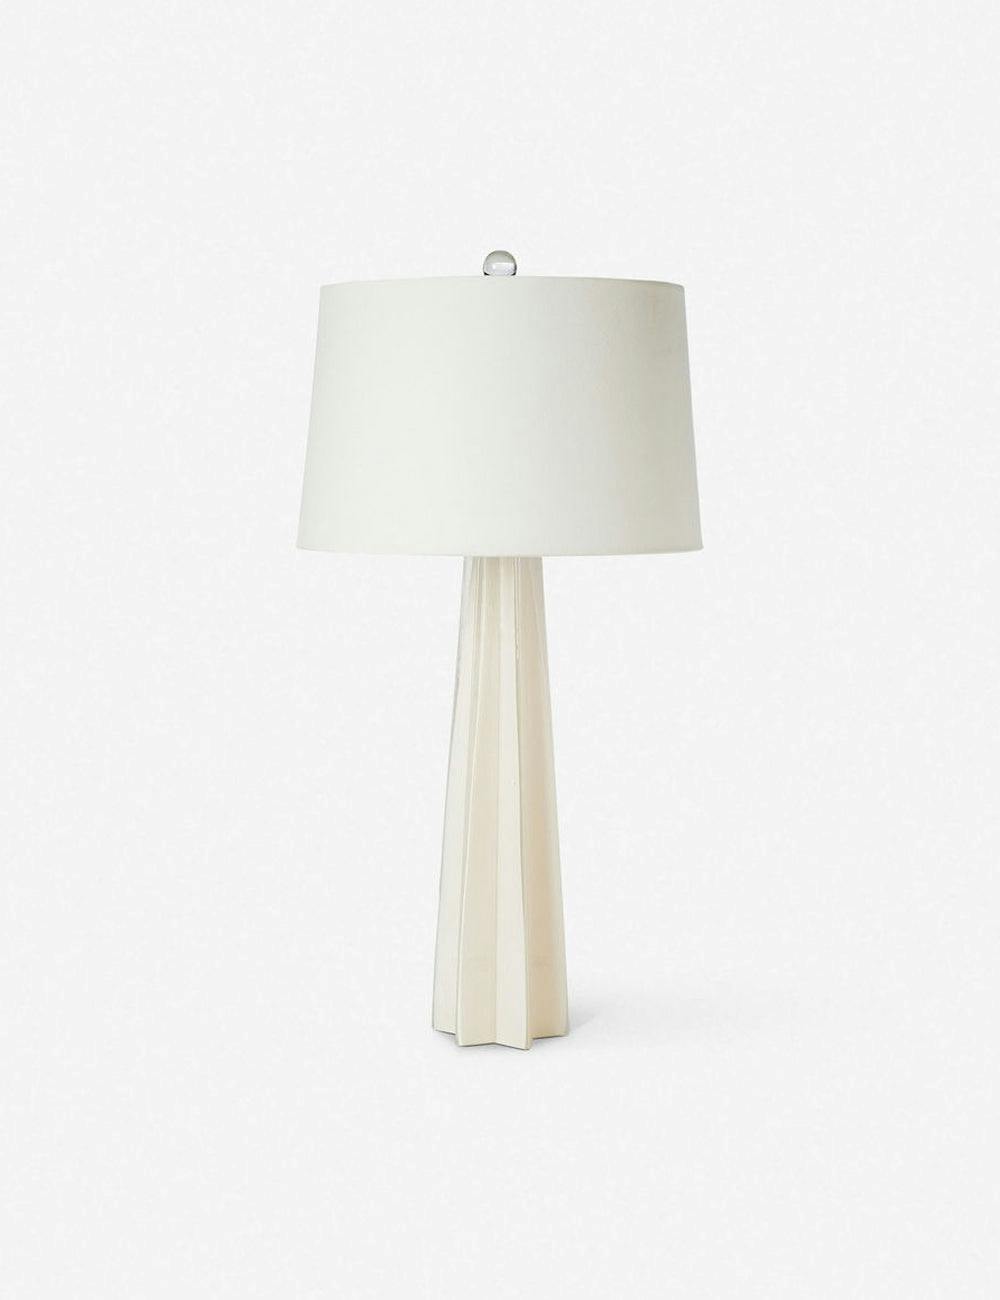 Elegant Star Silhouette White Glass Table Lamp with Linen Shade